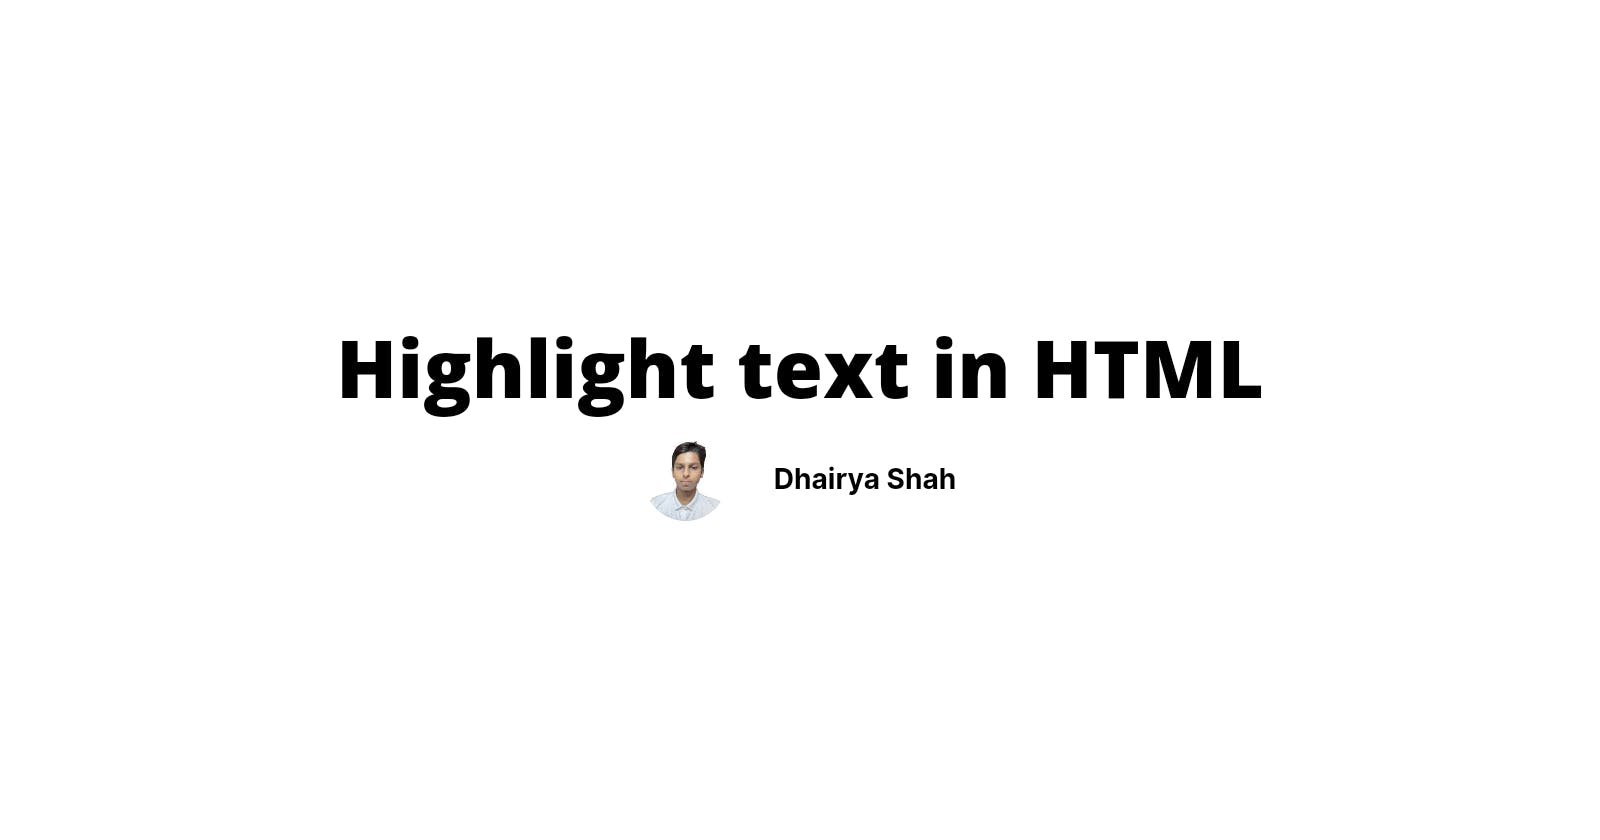 Highlight text in HTML